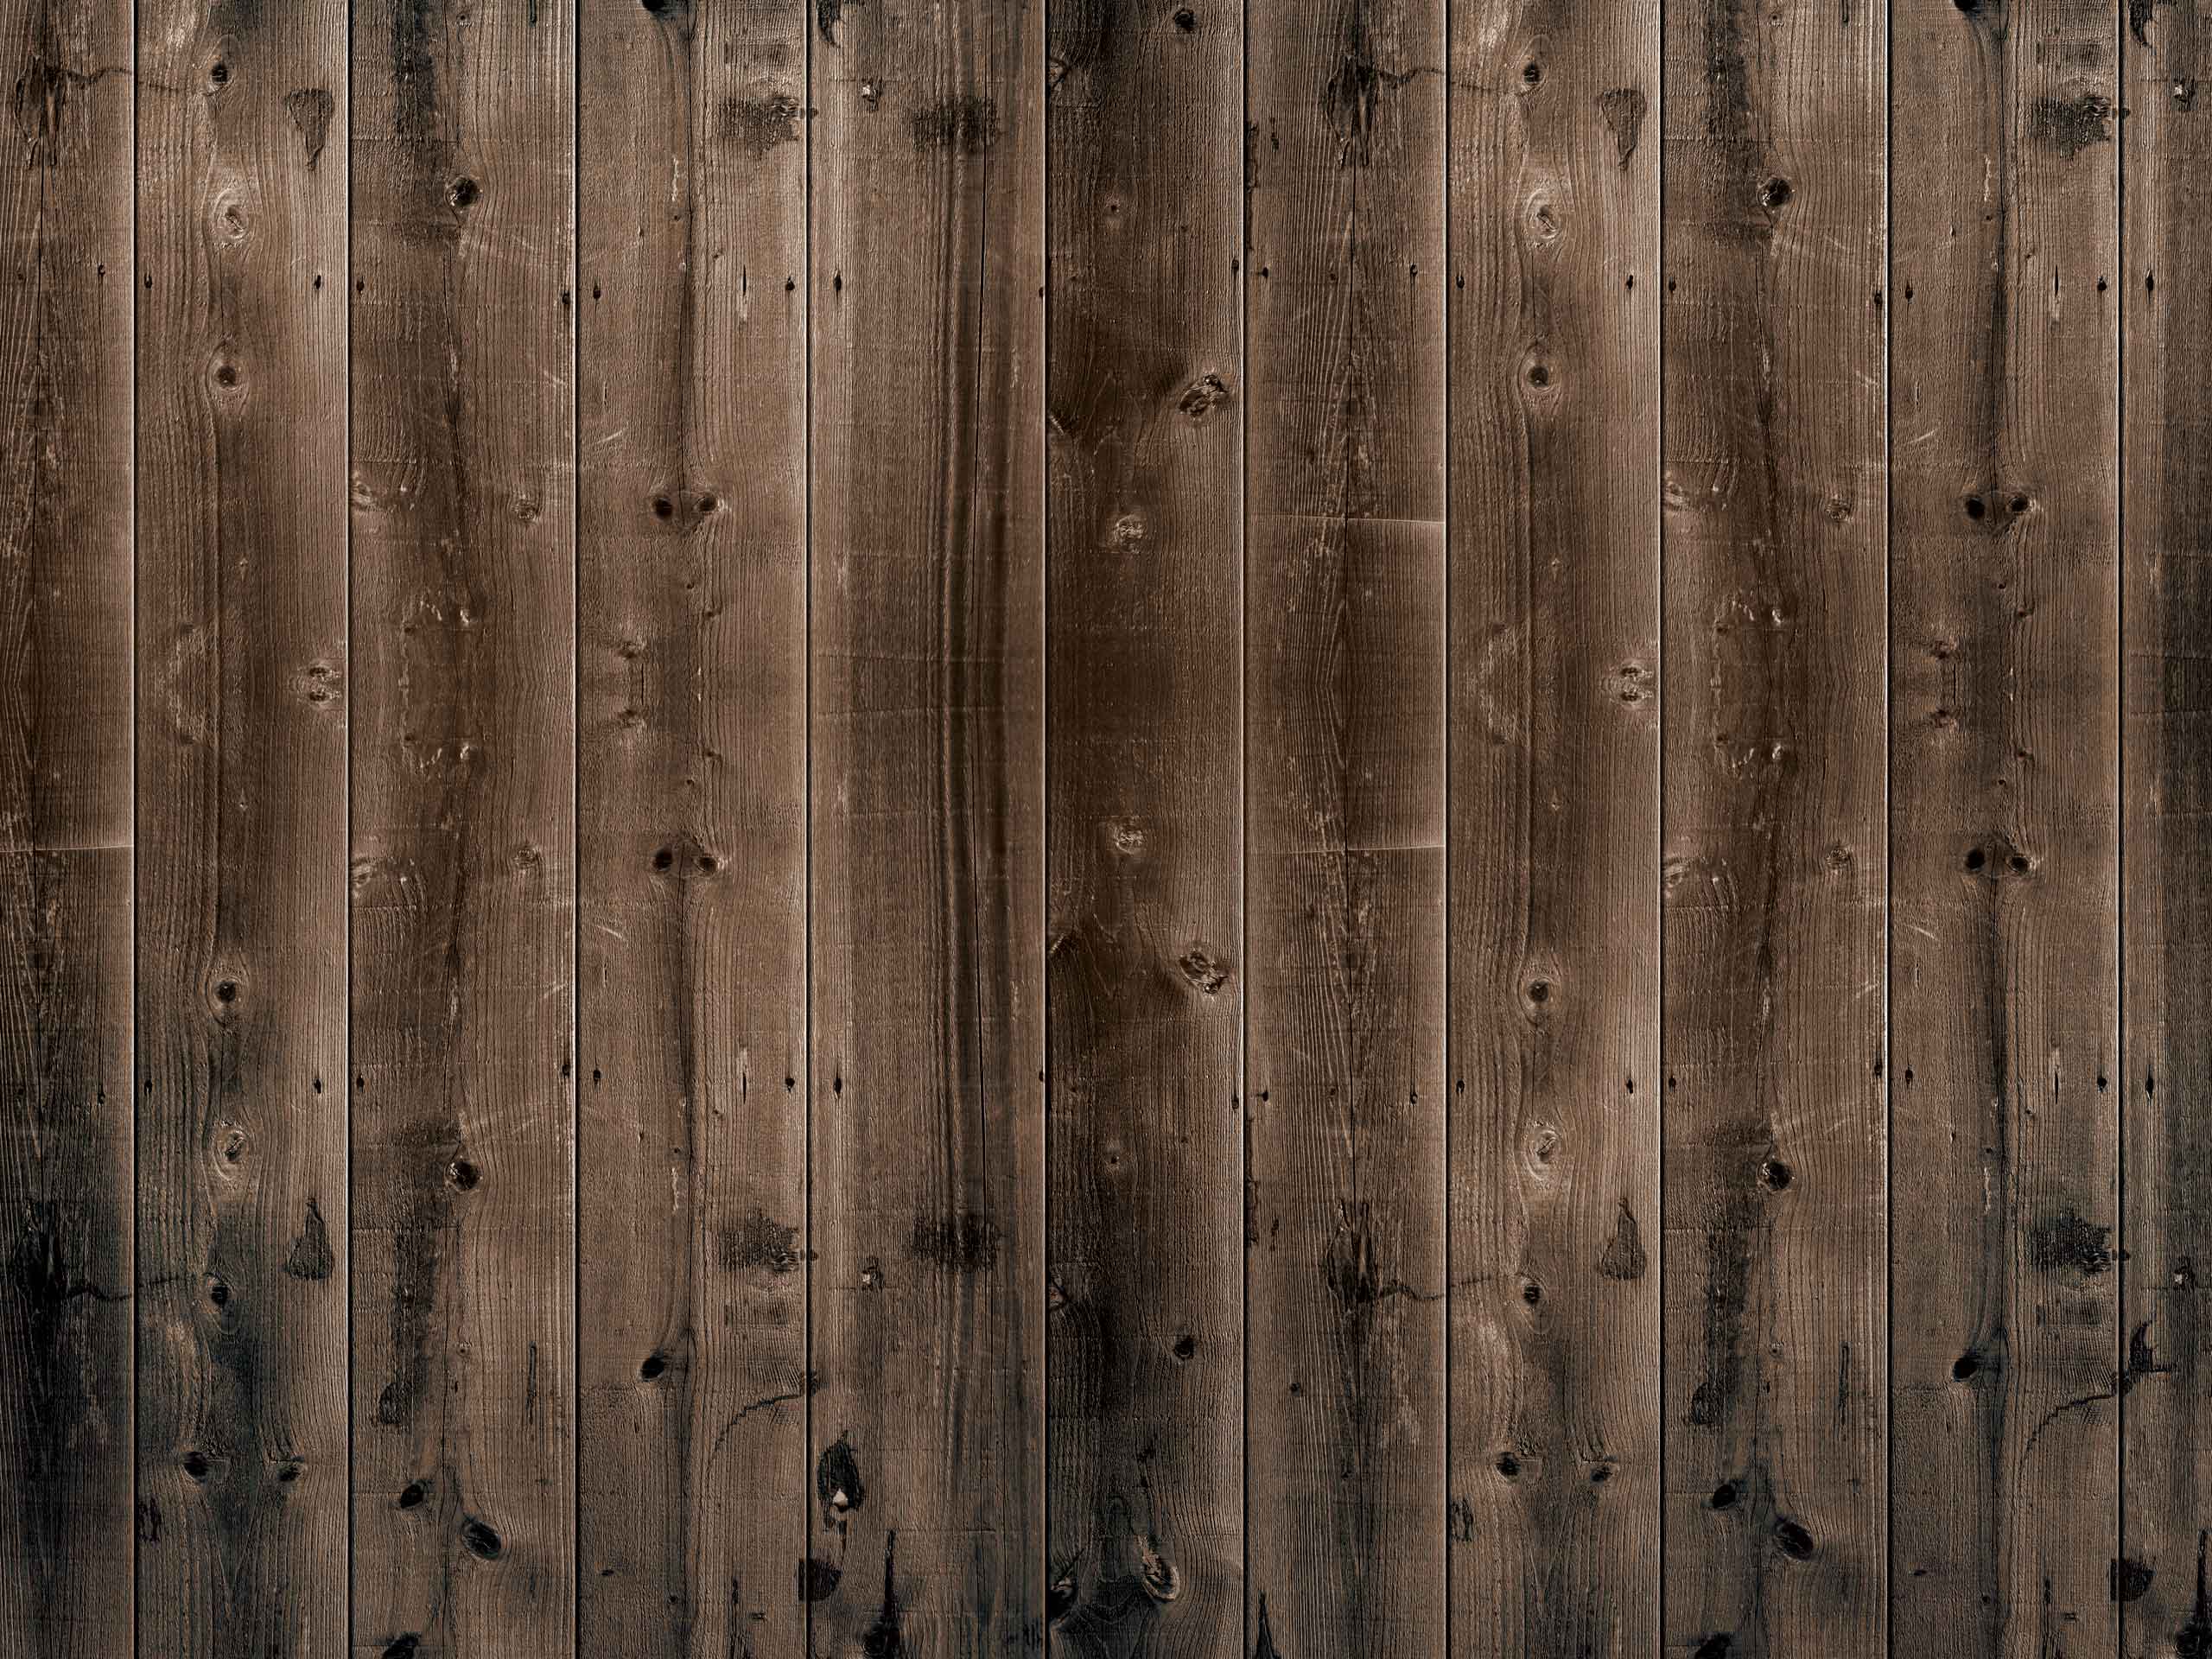 Barn Wood Pictures  Download Free Images on Unsplash